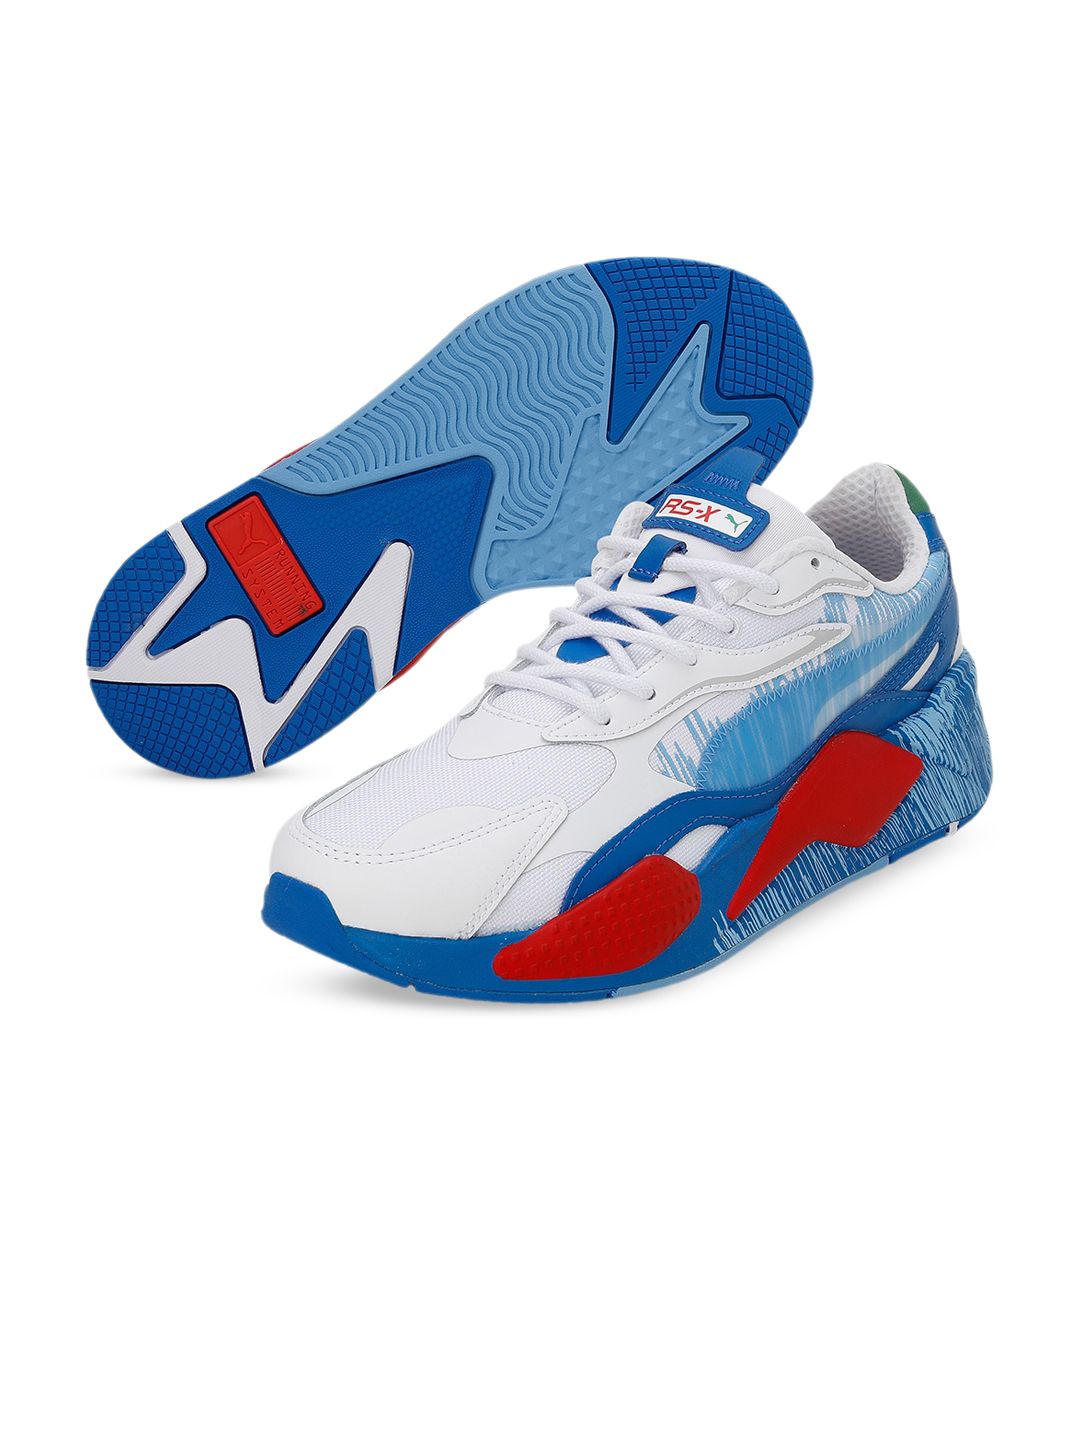 Puma RS-X RENDER Colourblocked Sneakers Price in India